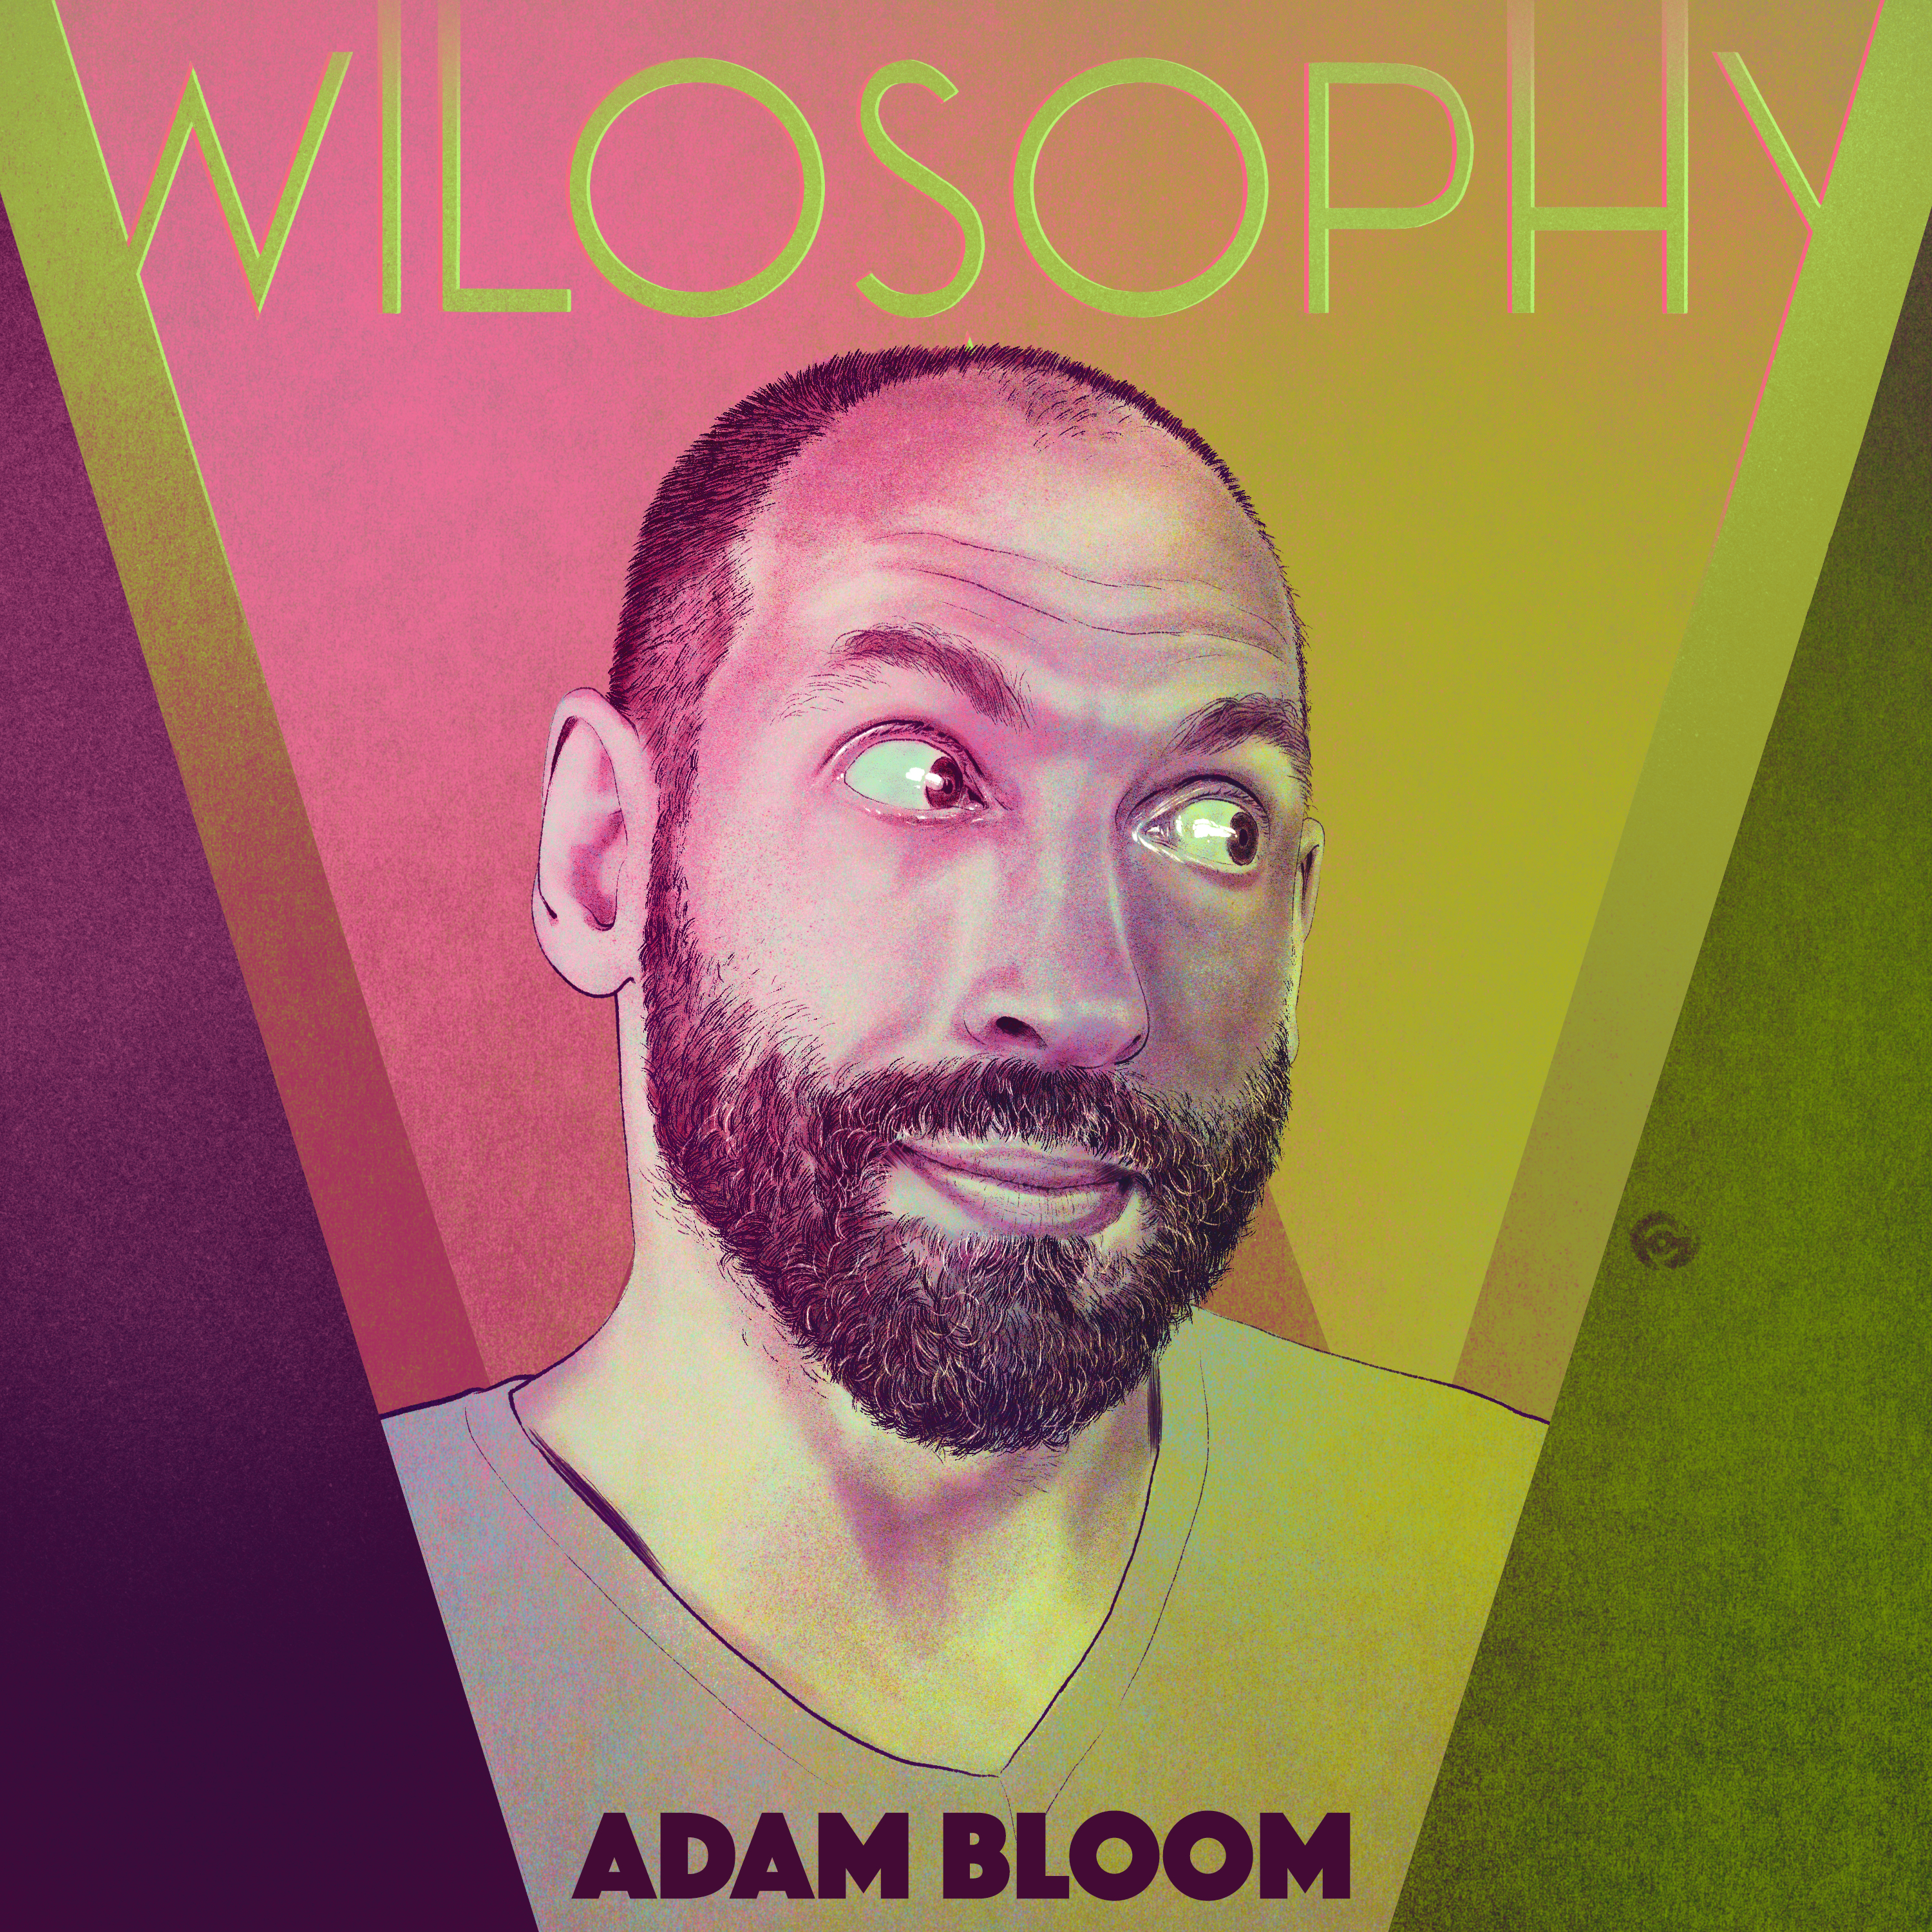 WILOSOPHY: Adam Bloom - You Don't Know What You've Got Til It's Gone